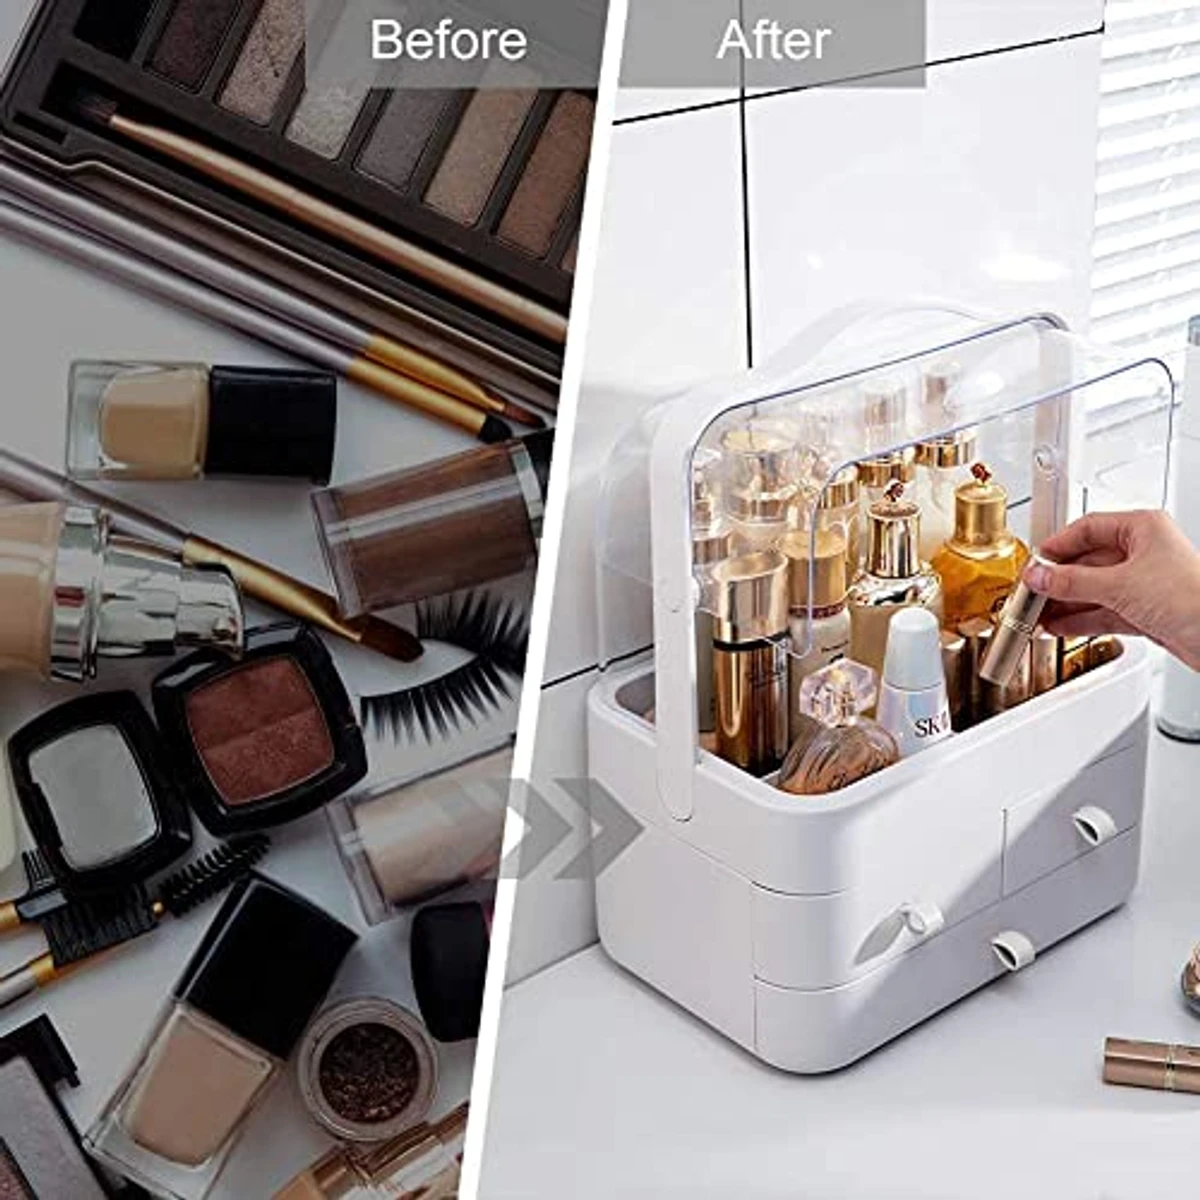 KRIVA ABS Plastic with Acrylic Makeup Cosmetic Storage Box | Dust-Proof Desktop makeup Organizer with 3 drawer For Bathroom |Bedroom|Dressing Table|Lipstick Skincare Holder Great for Countertop(1pcs)